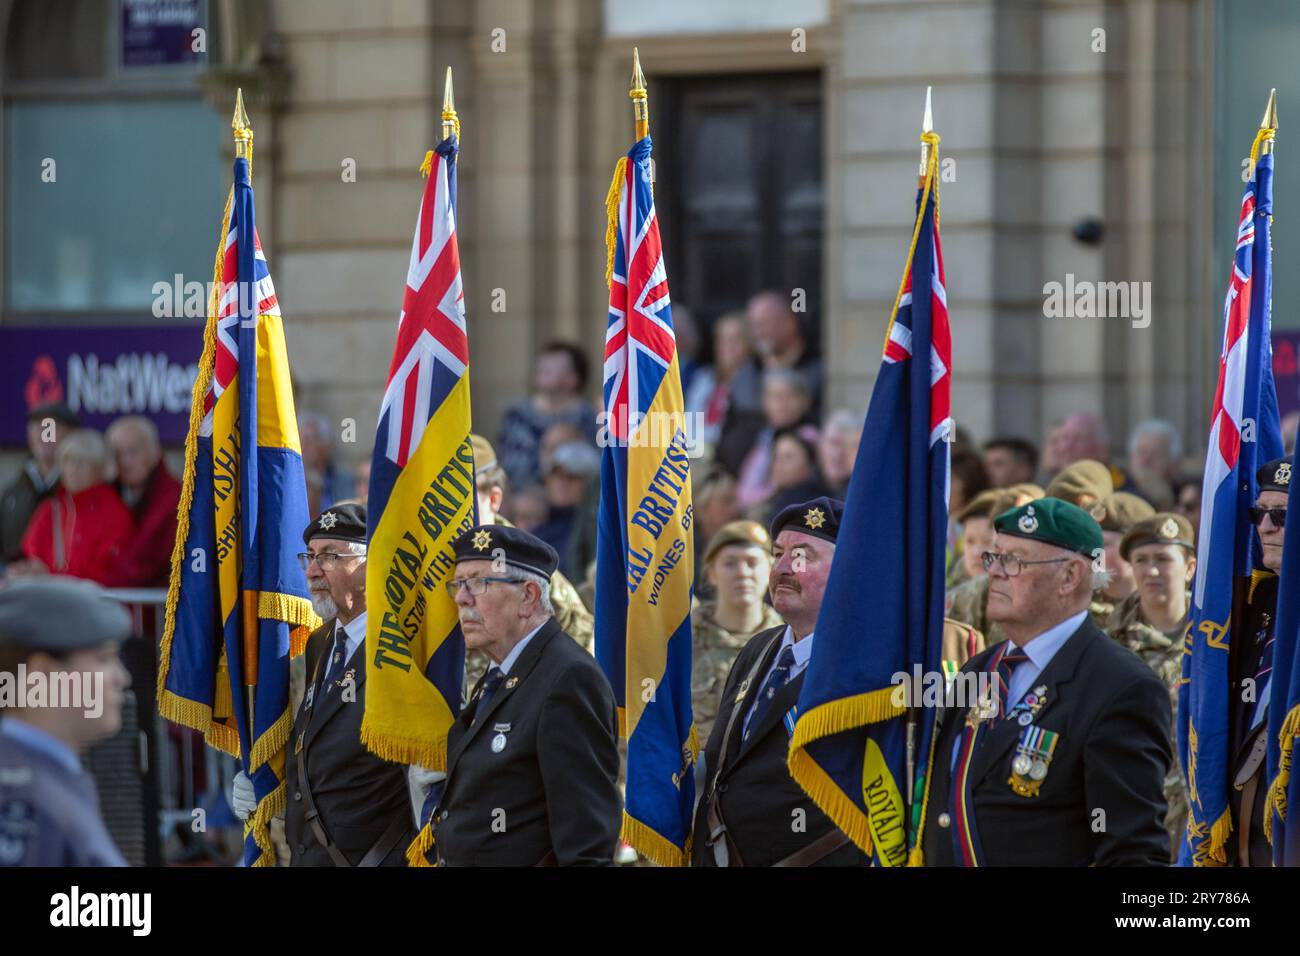 Southport, Merseyside UK 29. September 2023 H..R.H. Die PRINZESSIN ROYAL bei der Royal British Legion, Armed Forces Charity 100 Years Birth Remendication Event in Southport, Credit MediaWorldImages/AlamyLiveNews Stockfoto